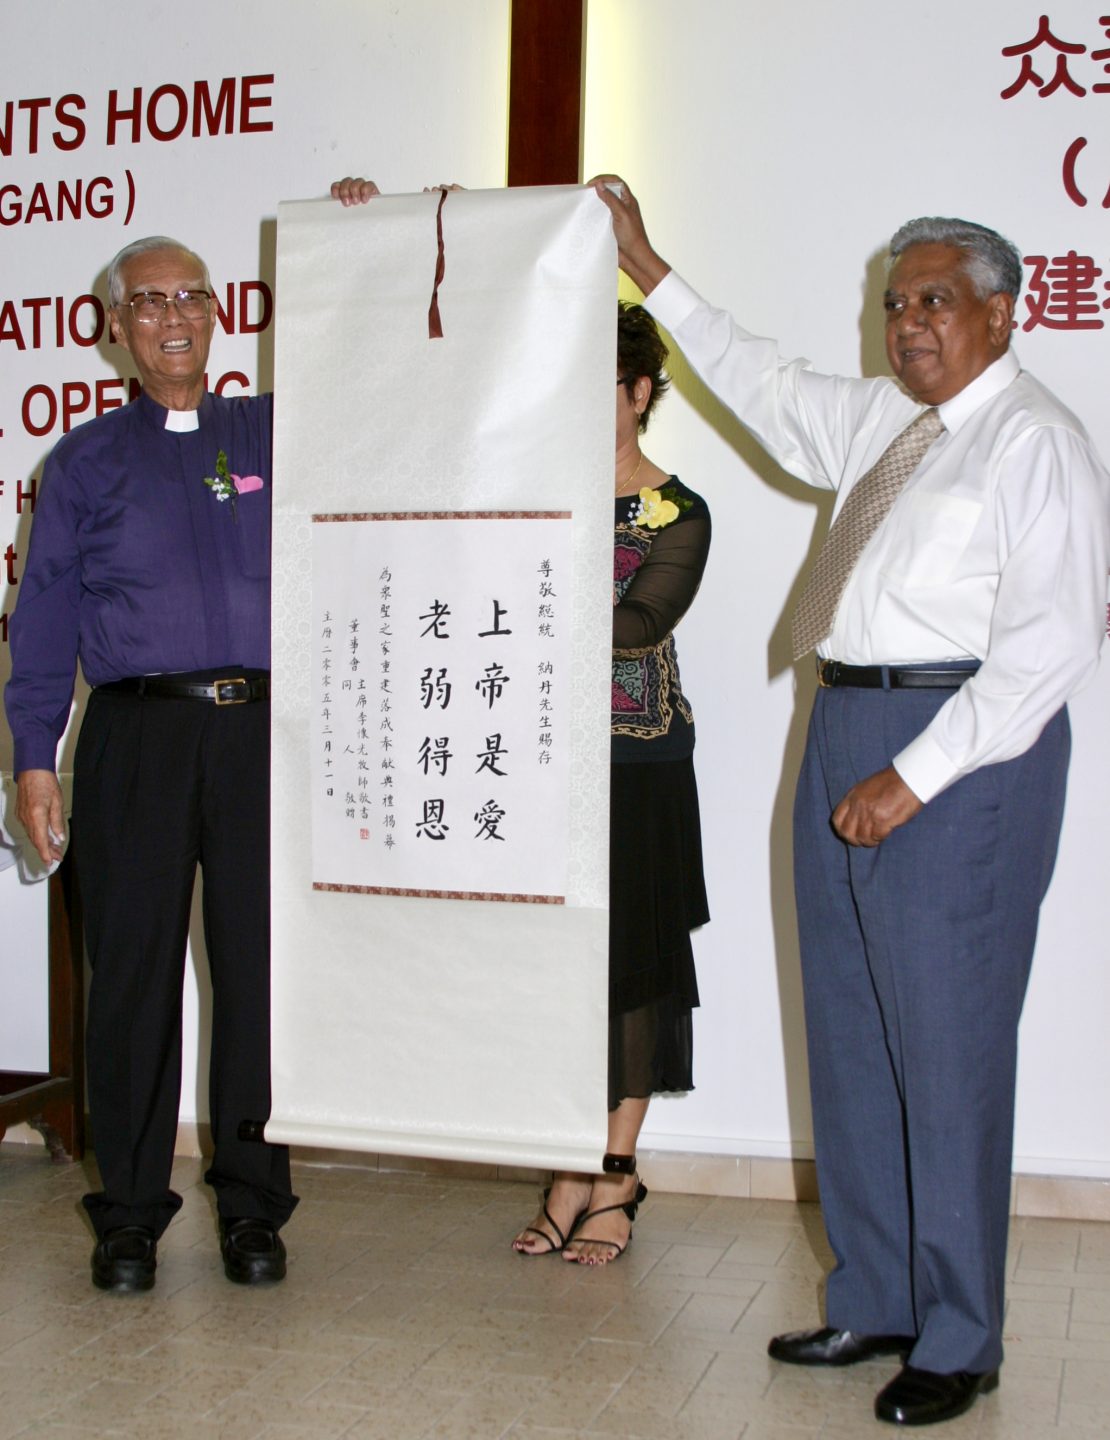 The late Rev Lee Huai Kwang with the late President SR Nathan at the All Saints Home (Hougang) Re-Dedication and Official Opening Ceremony on 11 March 2005. The late Rev Lee was 87 years old then. Photo courtesy of All Saints Home.